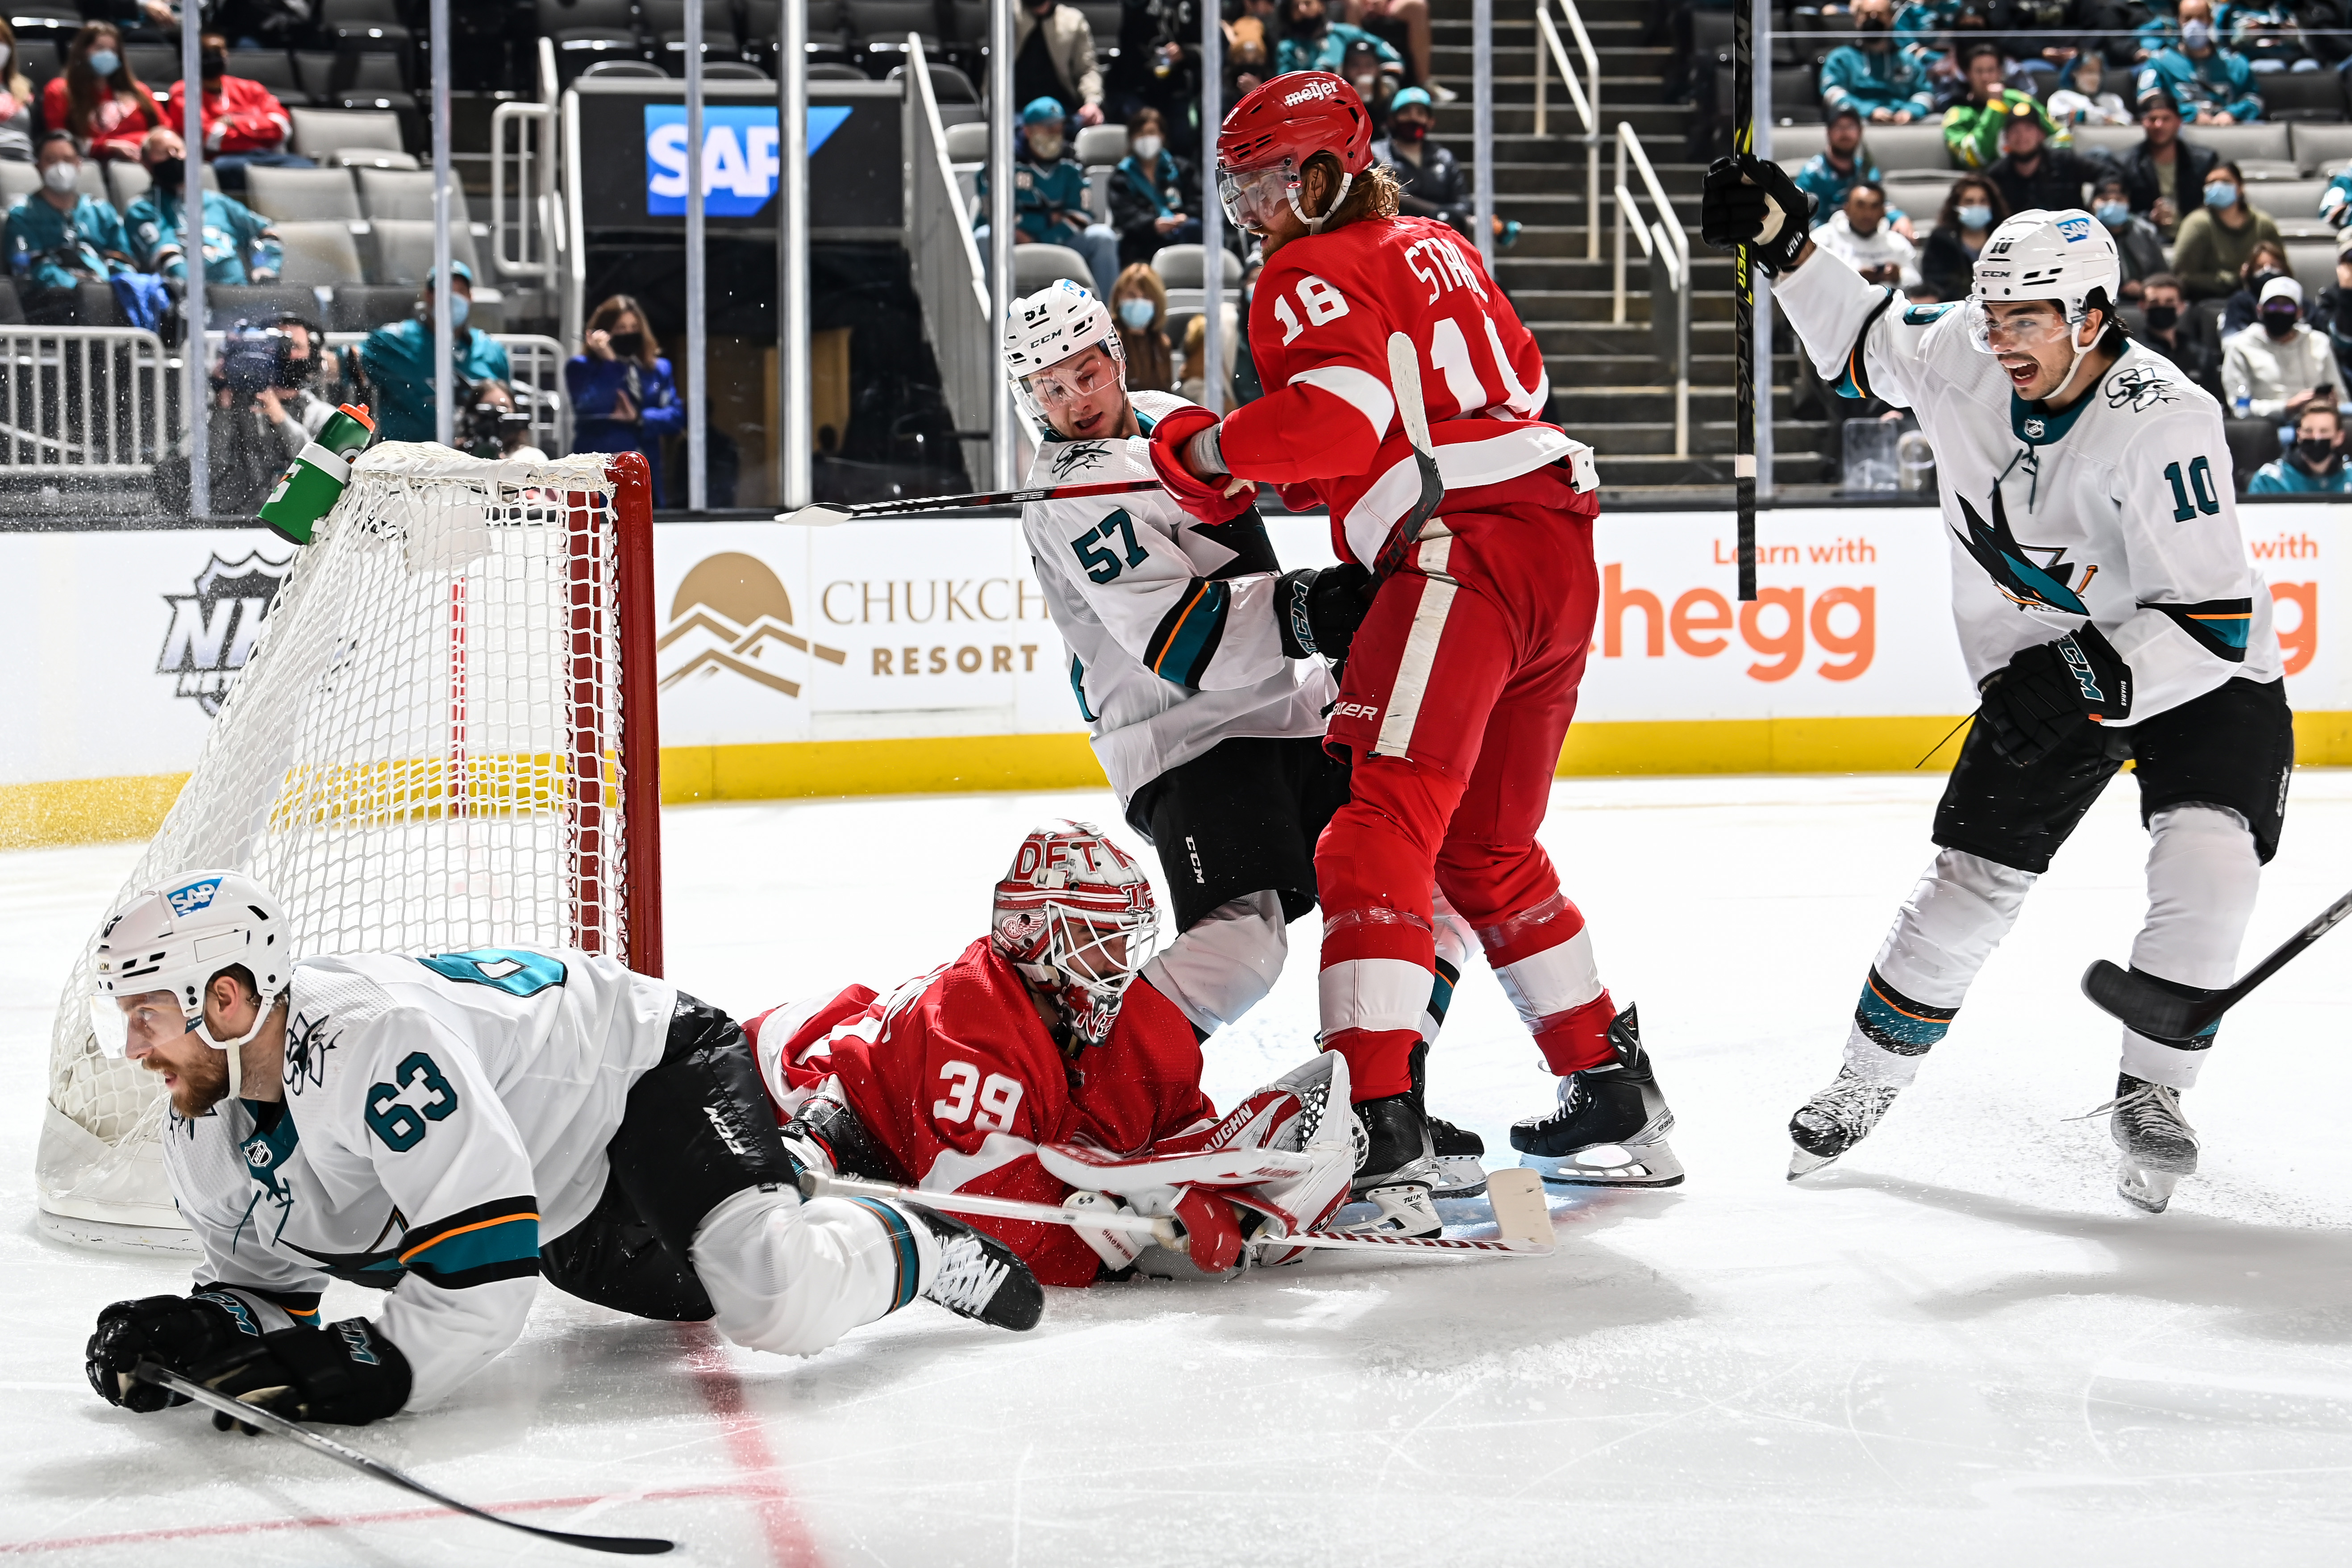 Jeffrey Viel #63 of the San Jose Sharks scores a goal against Alex Nedeljkovic #39 of the Detroit Red Wings in a regular season game at SAP Center on January 11, 2022 in San Jose, California.